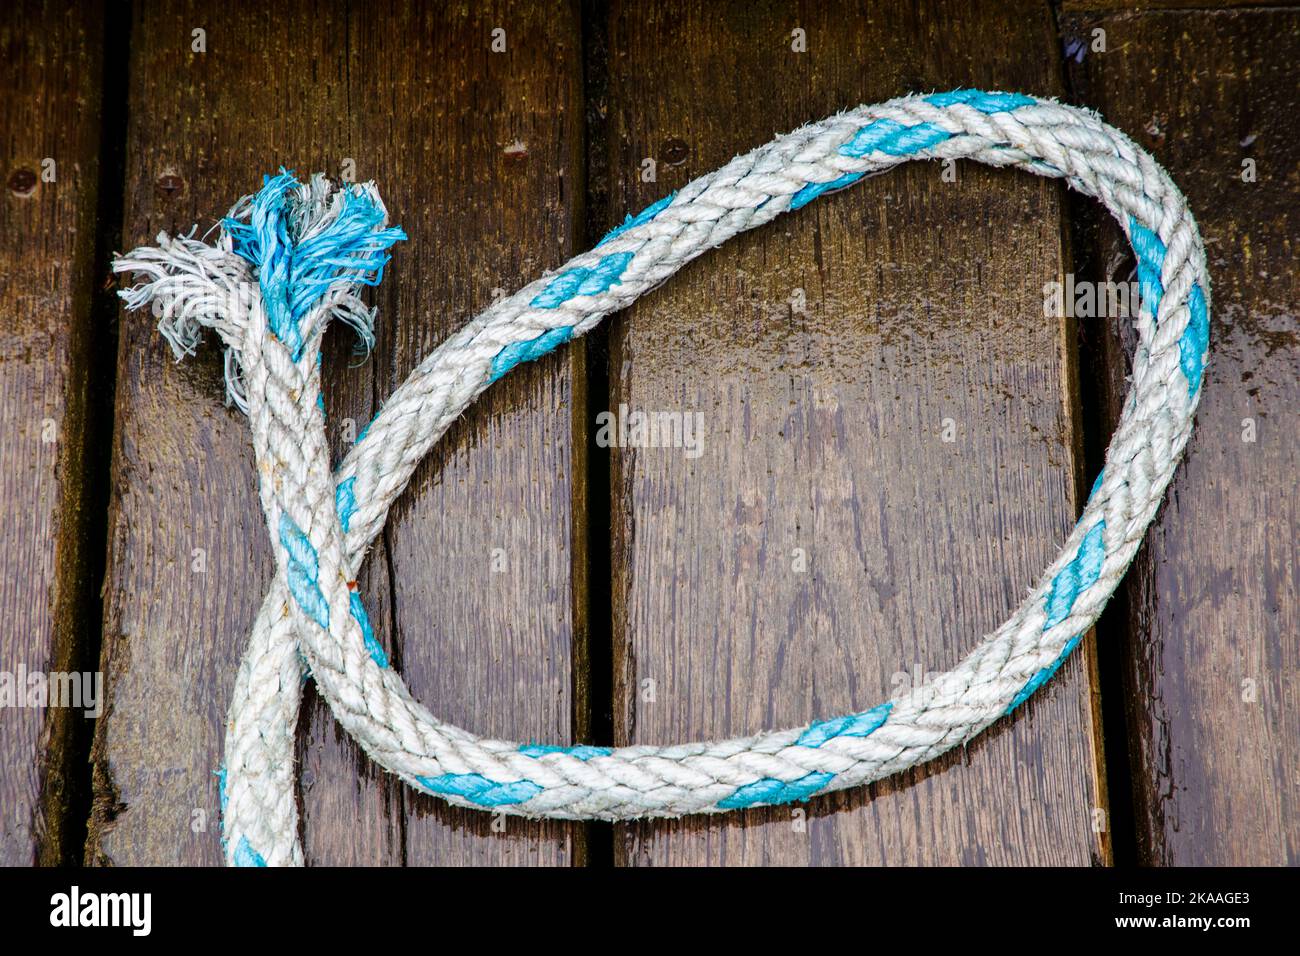 Colorful ropes and rigging. Charter and commercial fishing boats in the harbor, Kodiak, Alaska, USA. Stock Photo